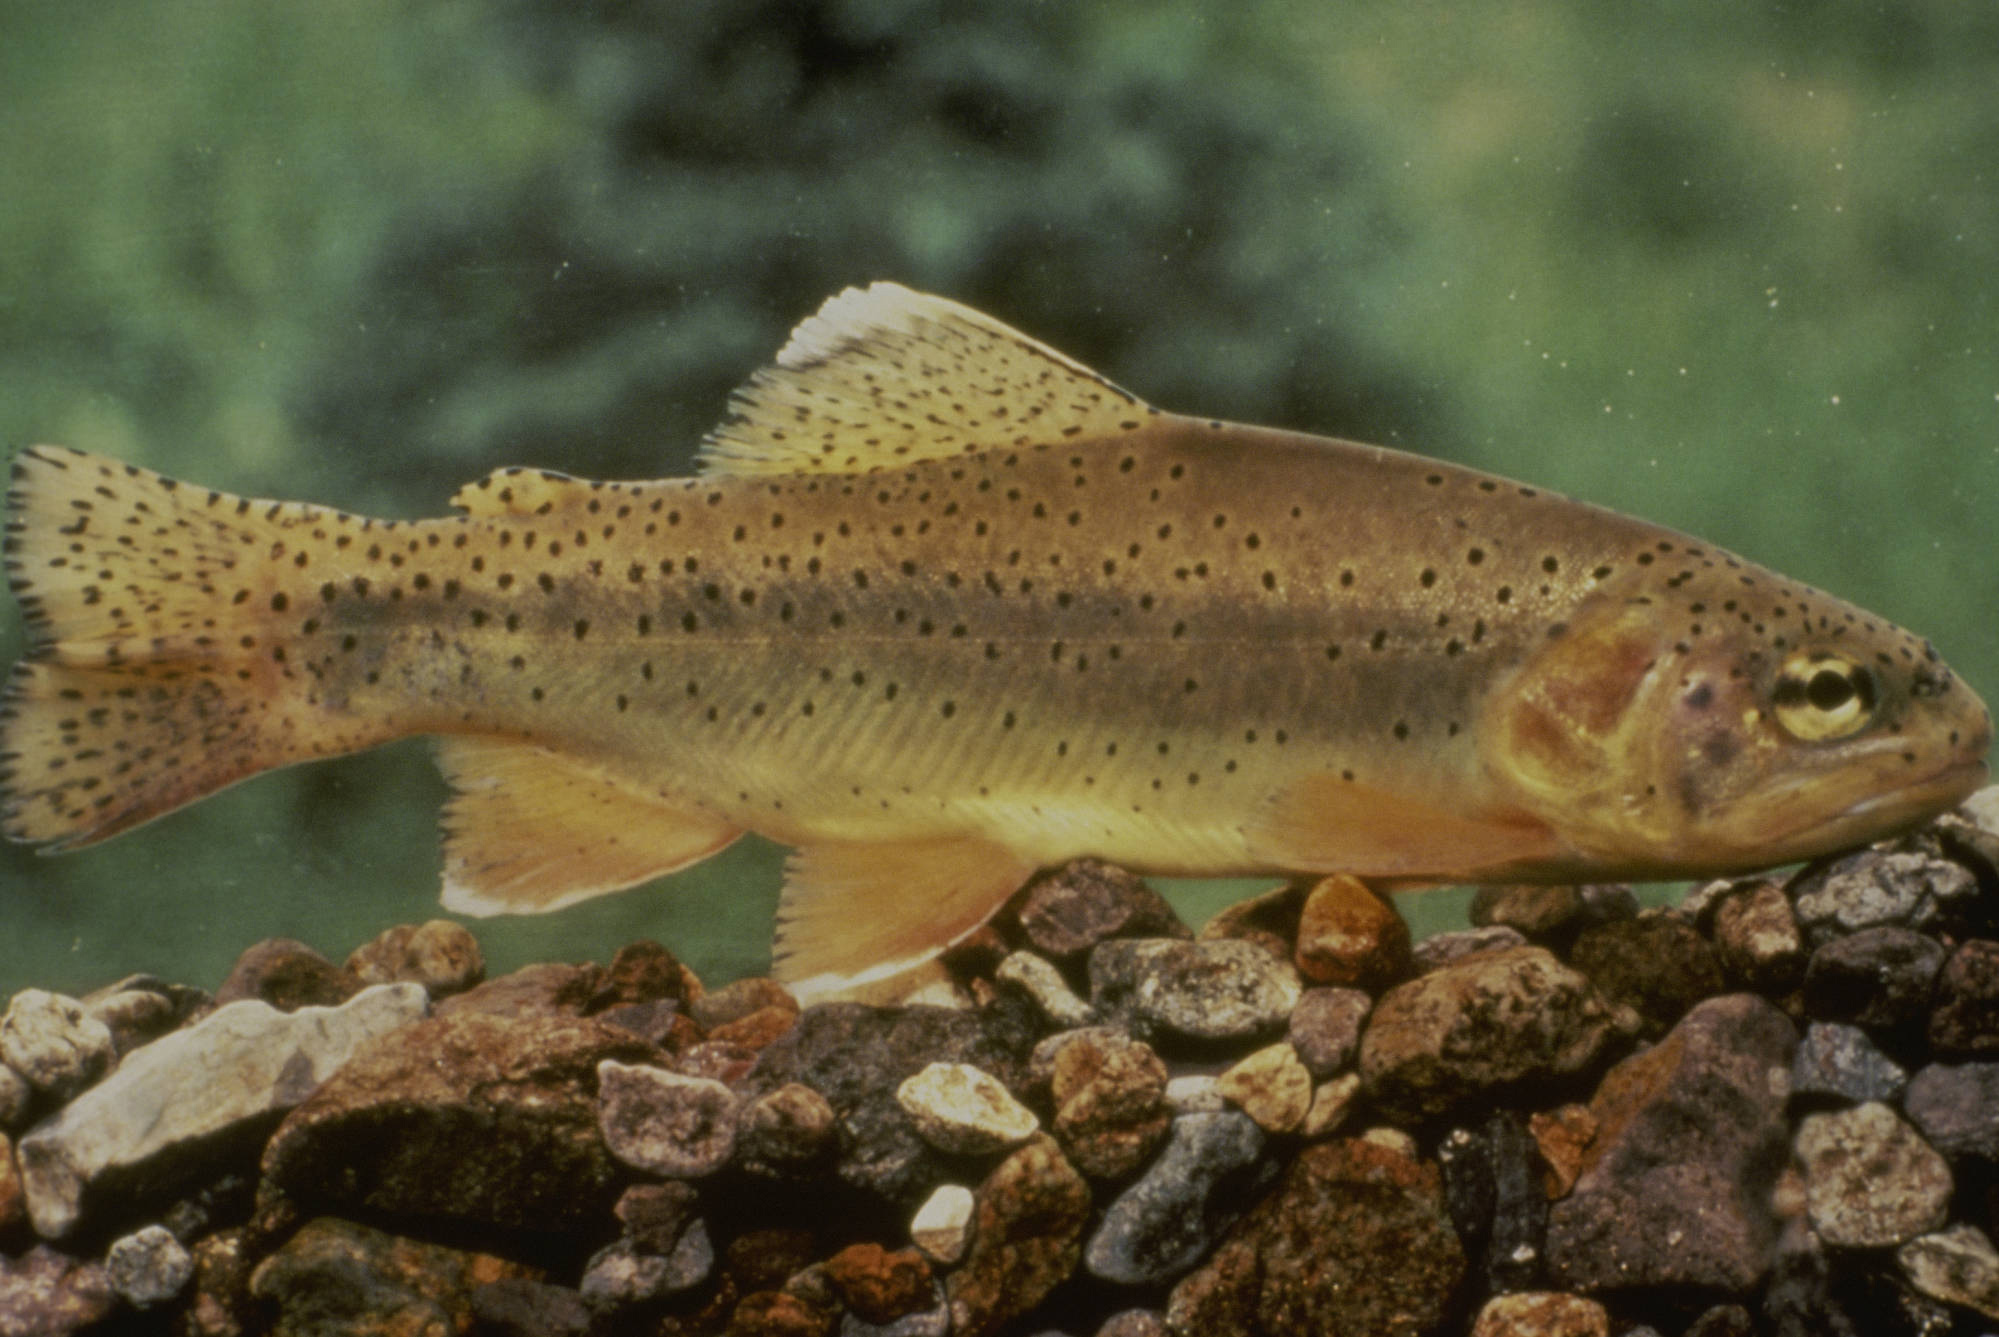 Arizona state fish, the Apache trout, is no longer considered endangered